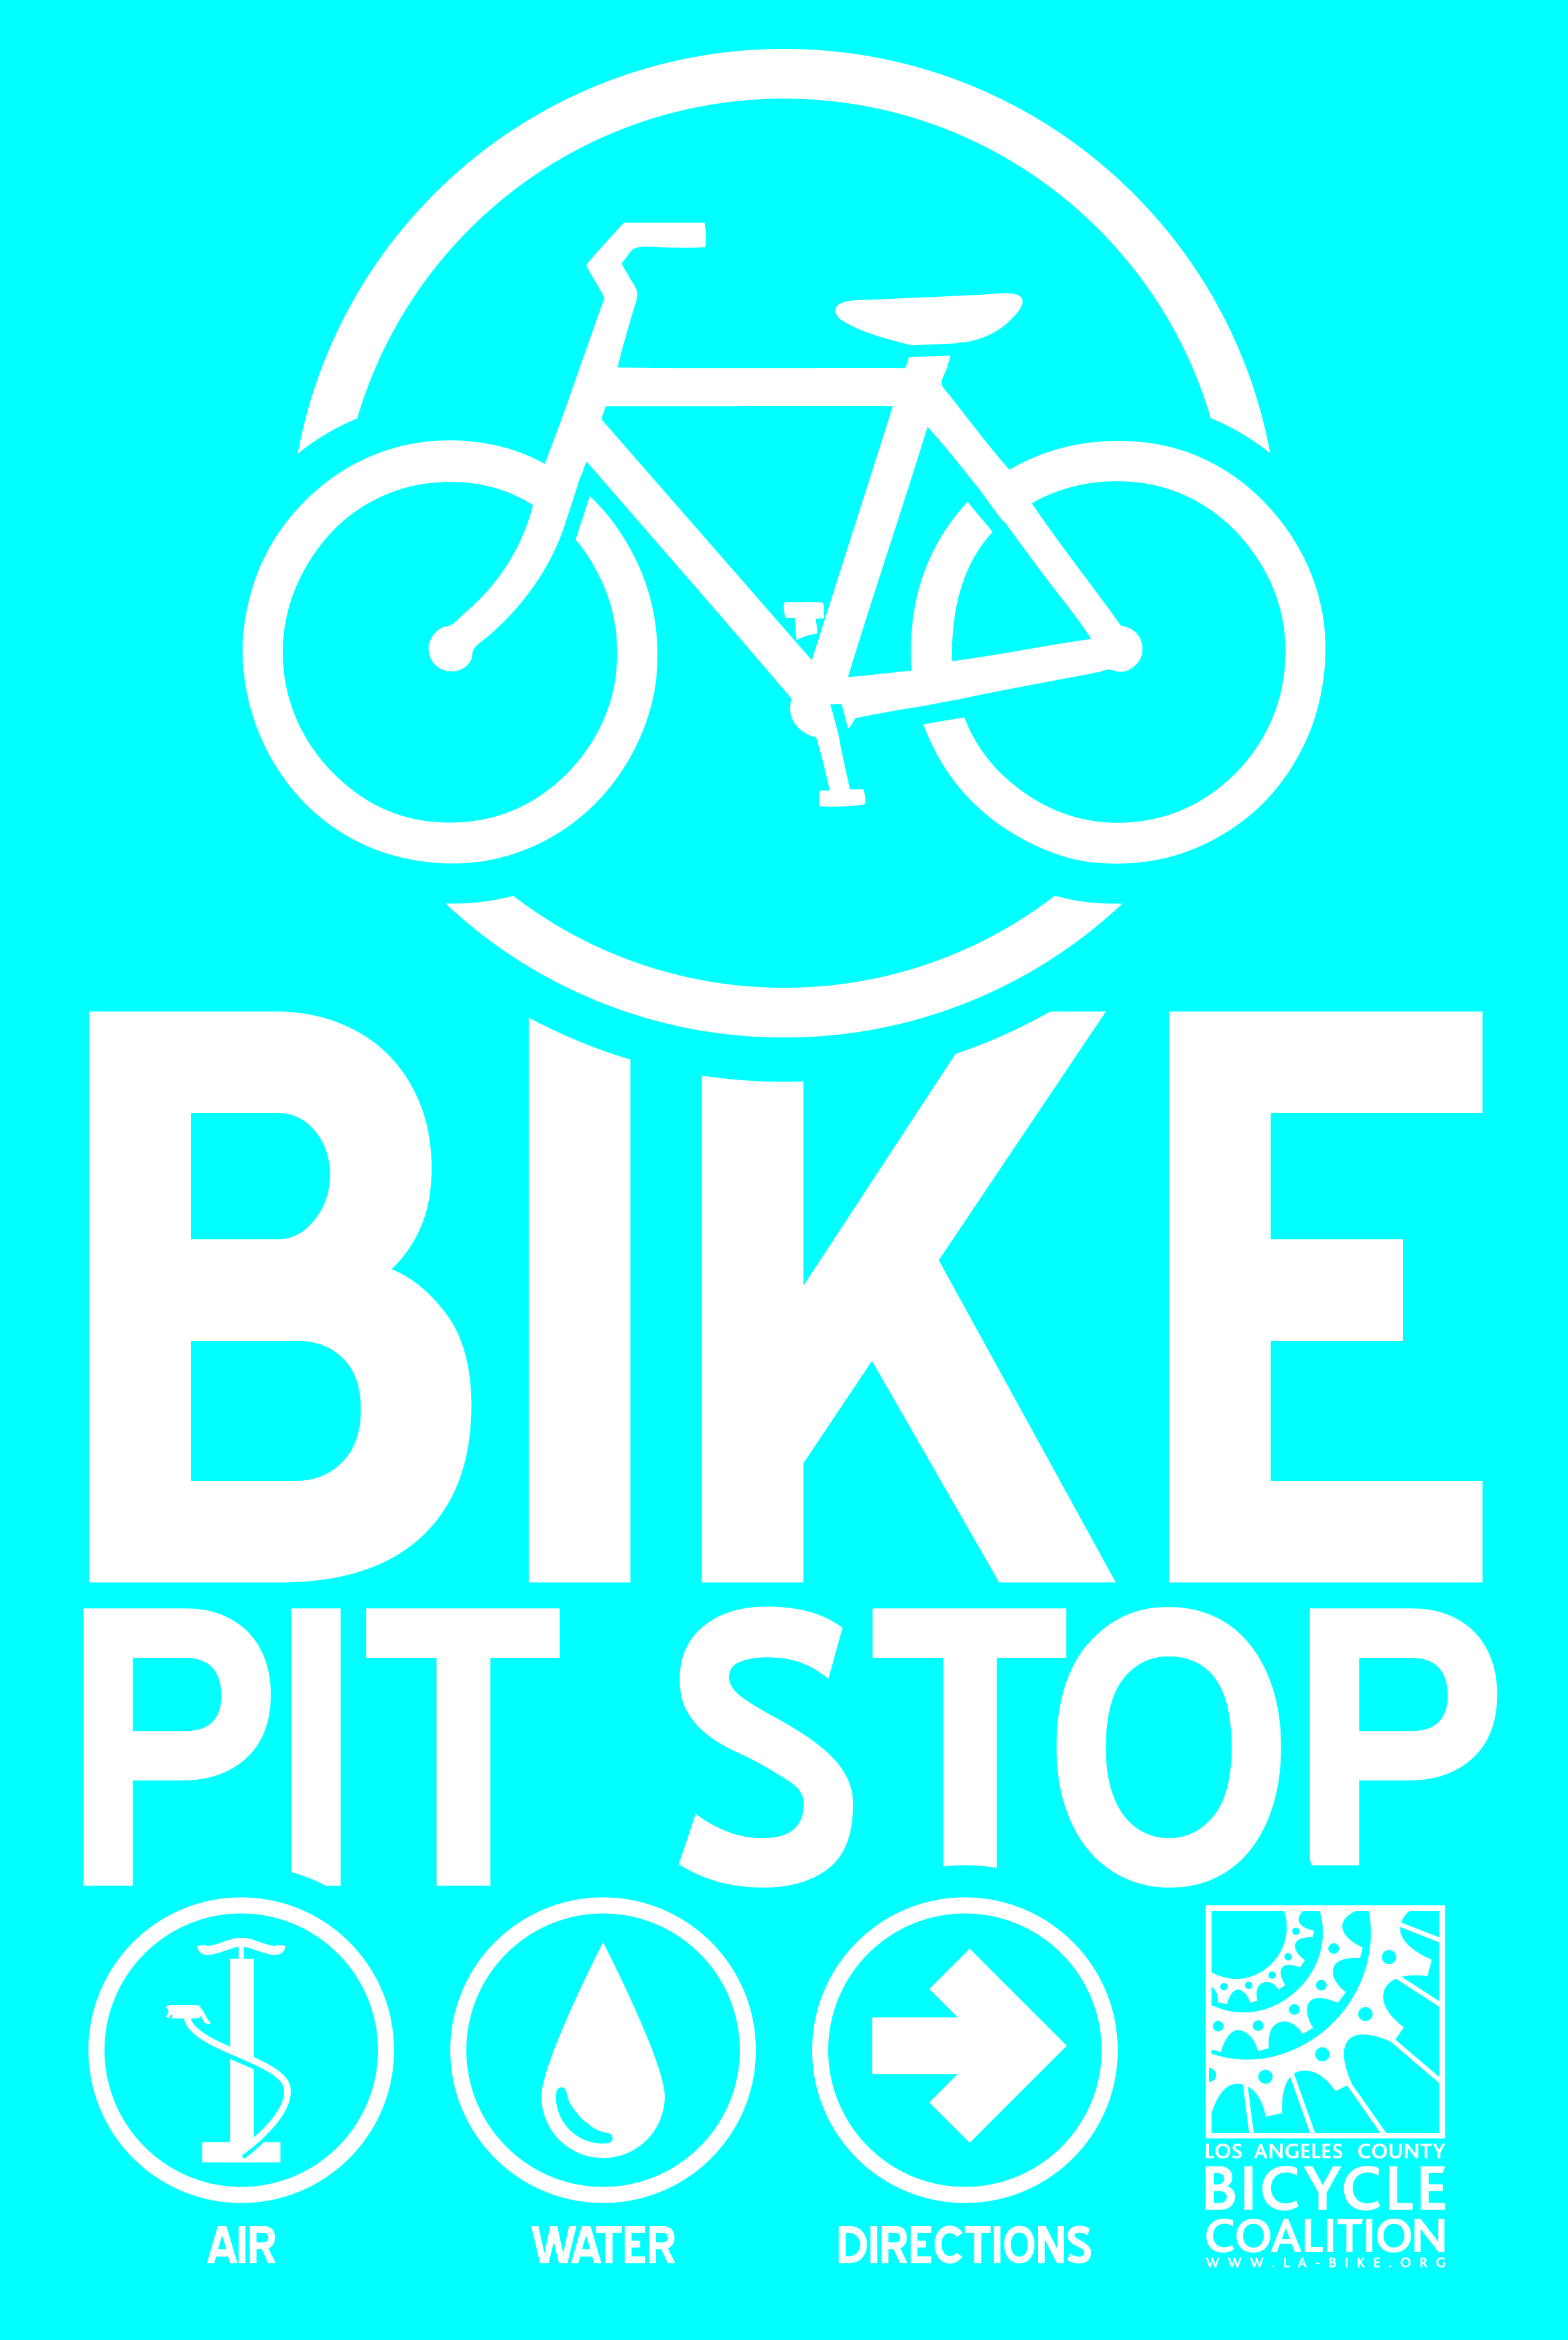 Bike Pit Stop poster for CicLAvia cycling event, designed for the Los Angeles County Bicycle Coalition.